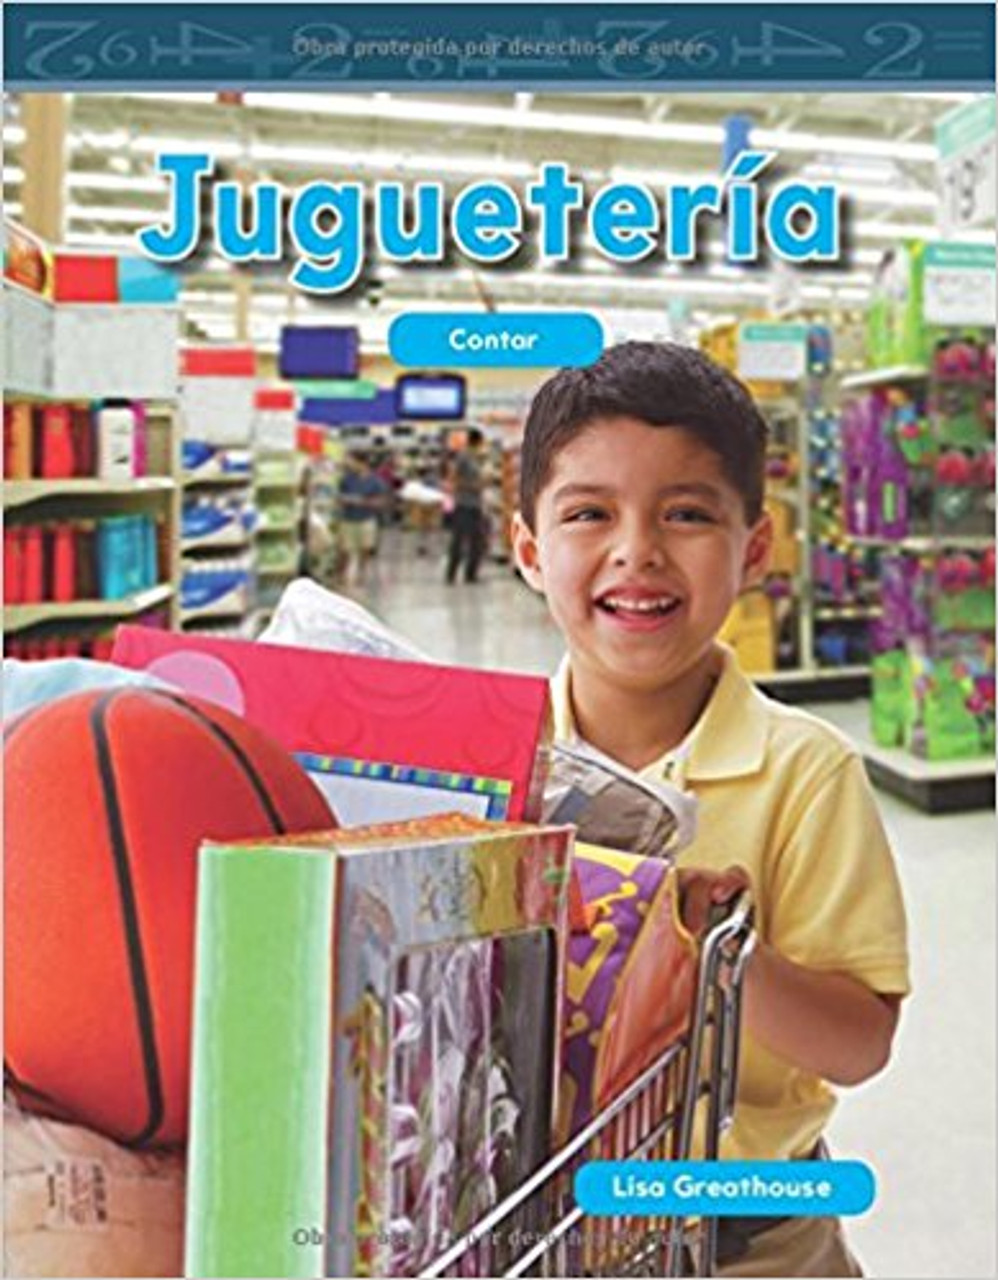 Make counting fun by counting how many toys there are at the toy store! This bright, engaging title has been translated into Spanish and helps young readers recognize numbers, practice counting to 20, and understand early STEM themes through helpful mathematical charts and vivid images of familiar toys. Children will be excited to practice counting with the featured "You Try It!" problems!